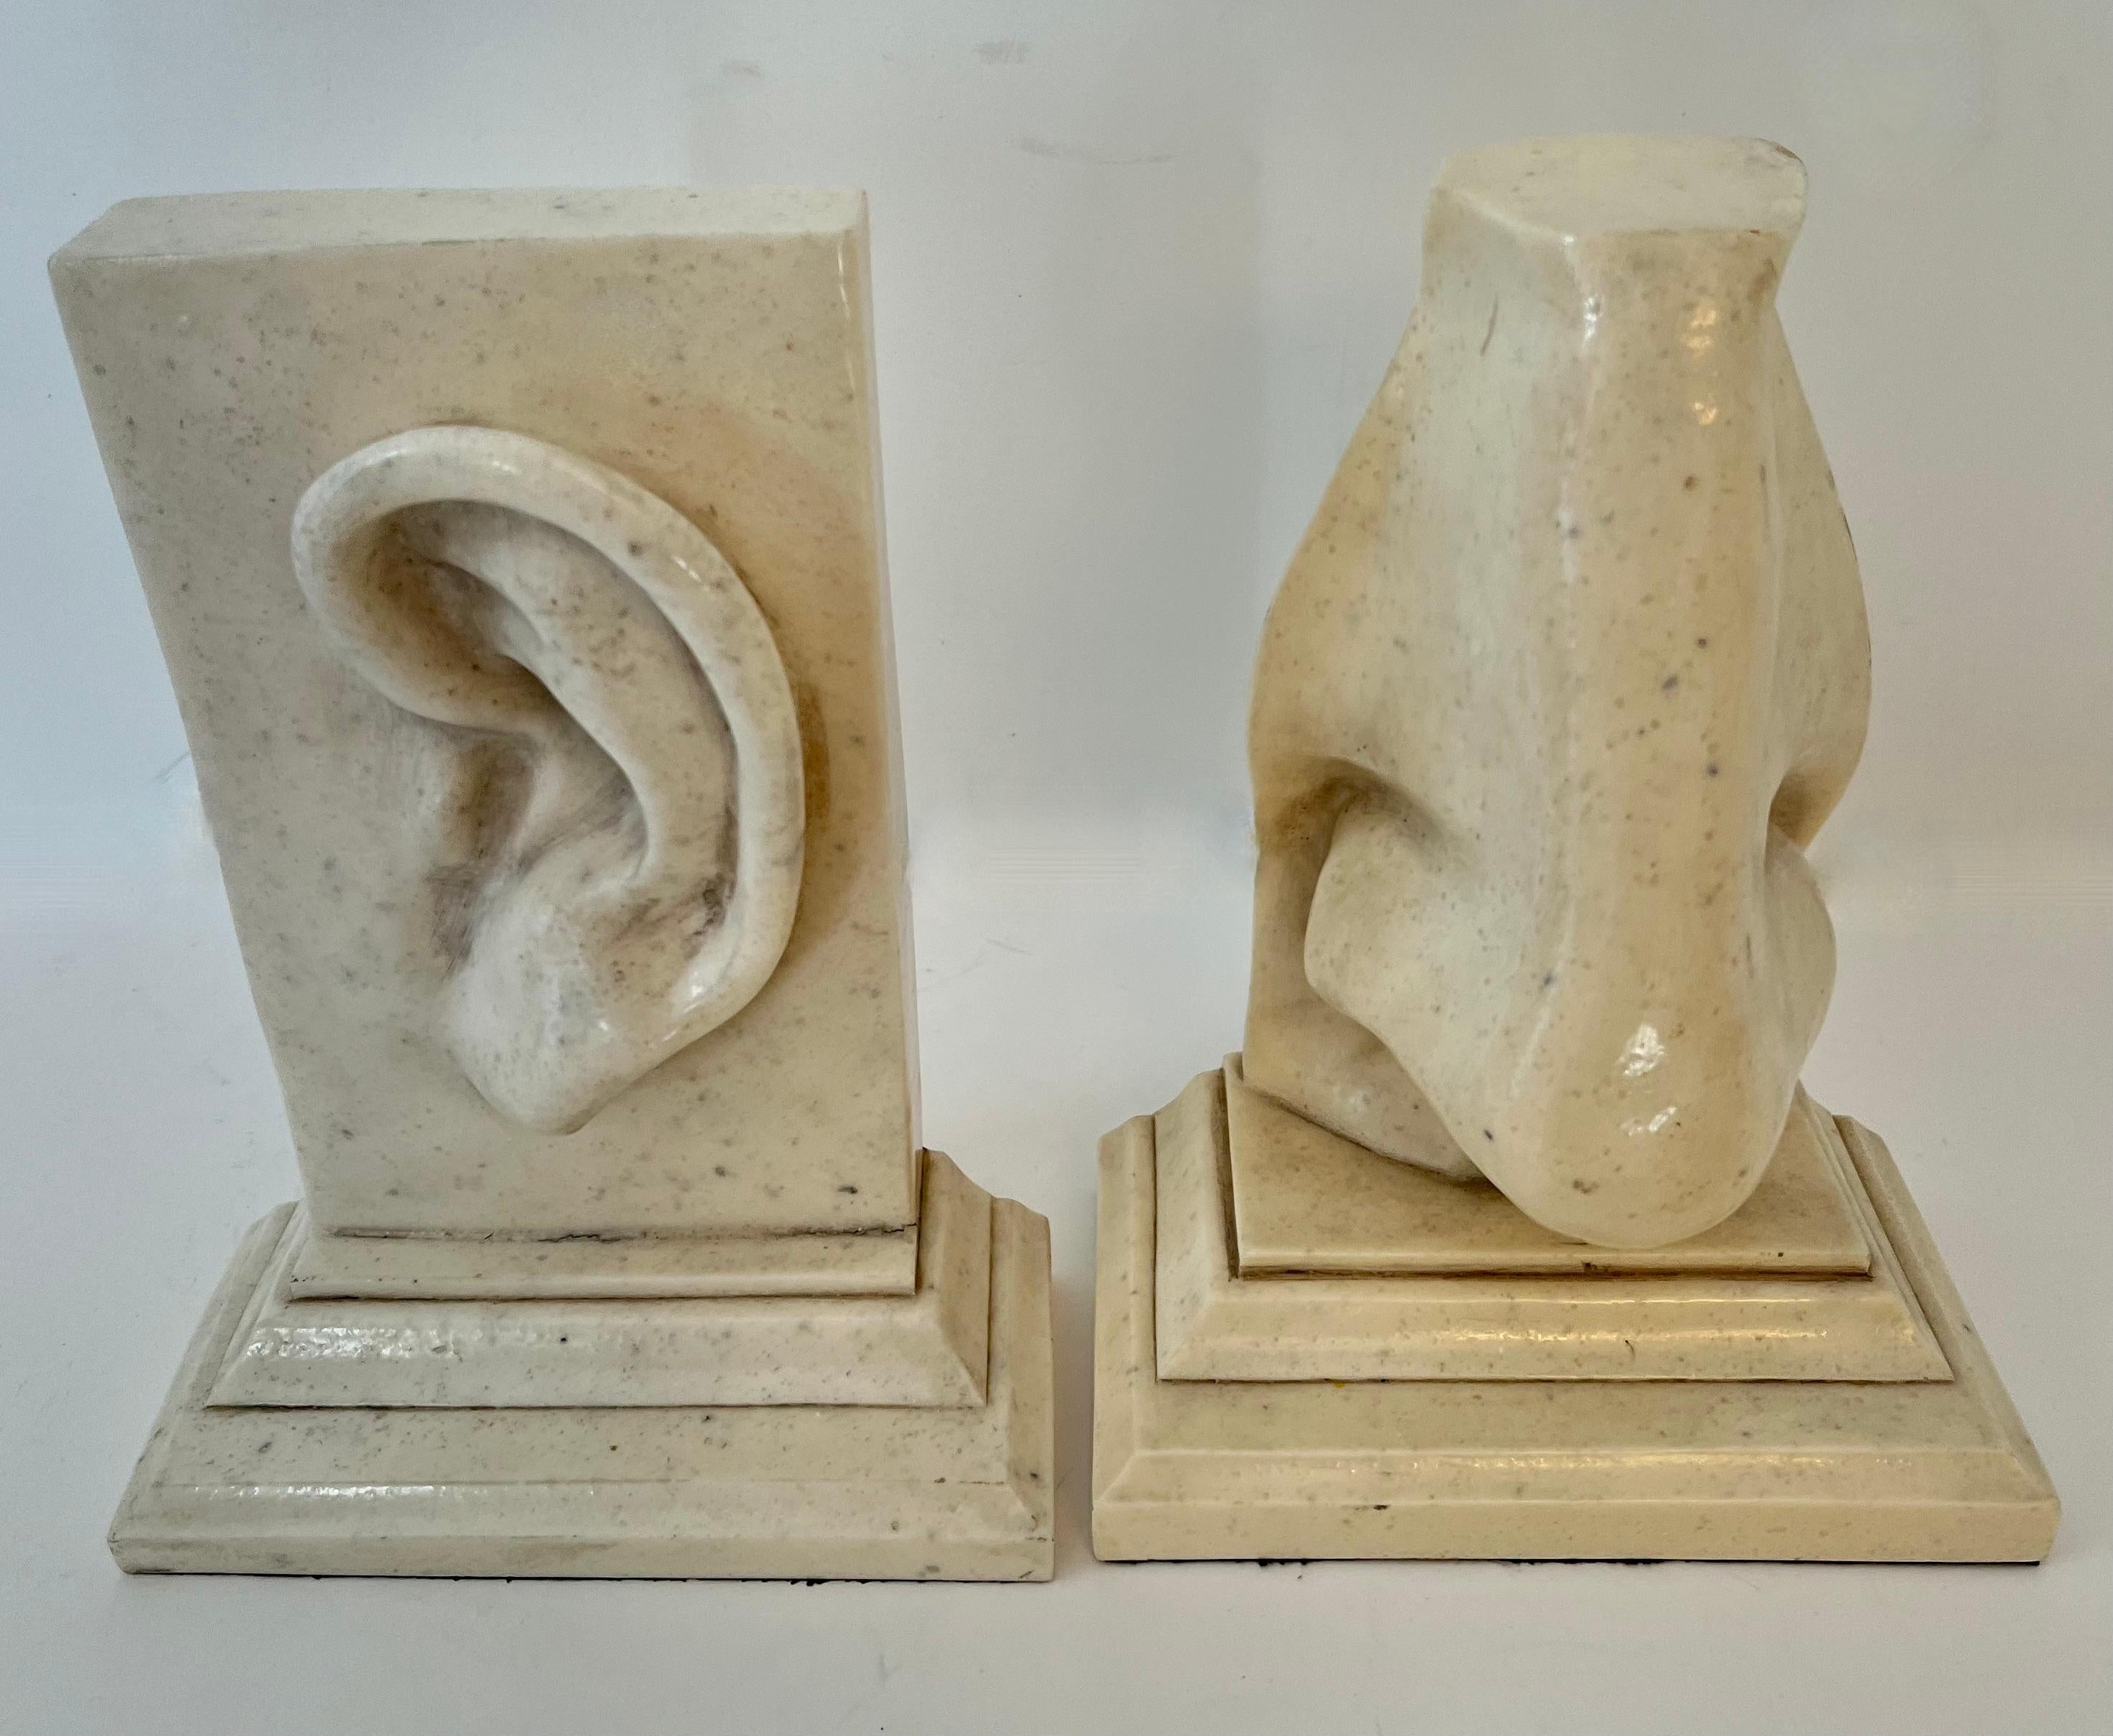 Pair of C2C Designs, a Resin Based Sculptural Ear and Nose Bookend Set For Sale 1